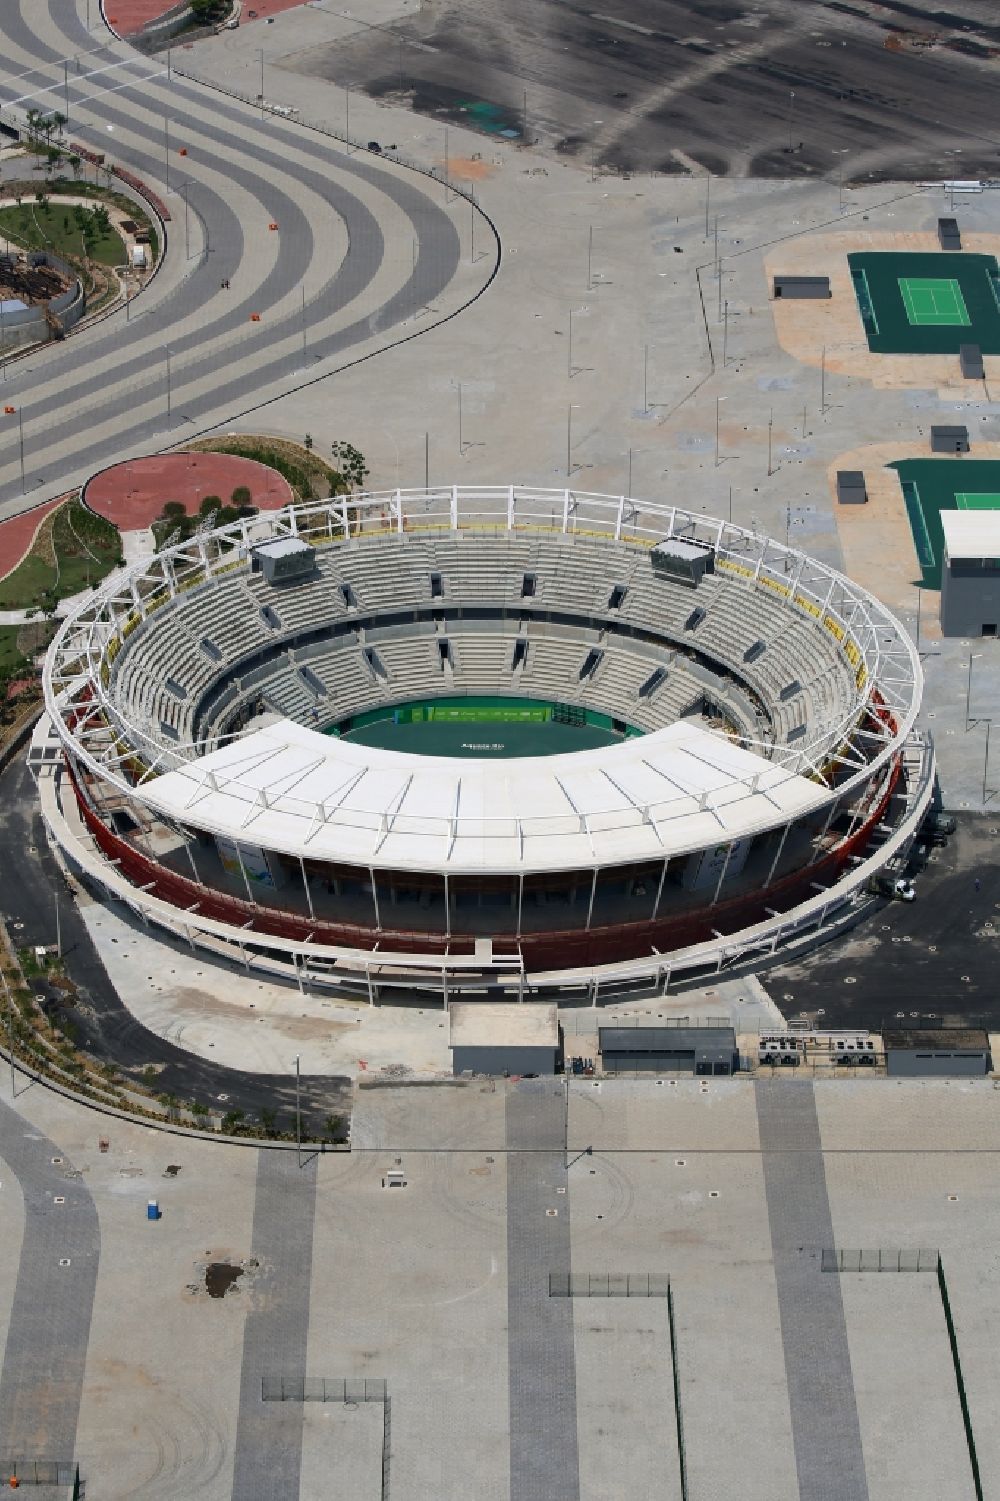 Rio de Janeiro from above - Building the tennis arena with green field in Barra Olympic Park before the summer playing games of XXII. Olympics in Rio de Janeiro in Rio de Janeiro, Brazil